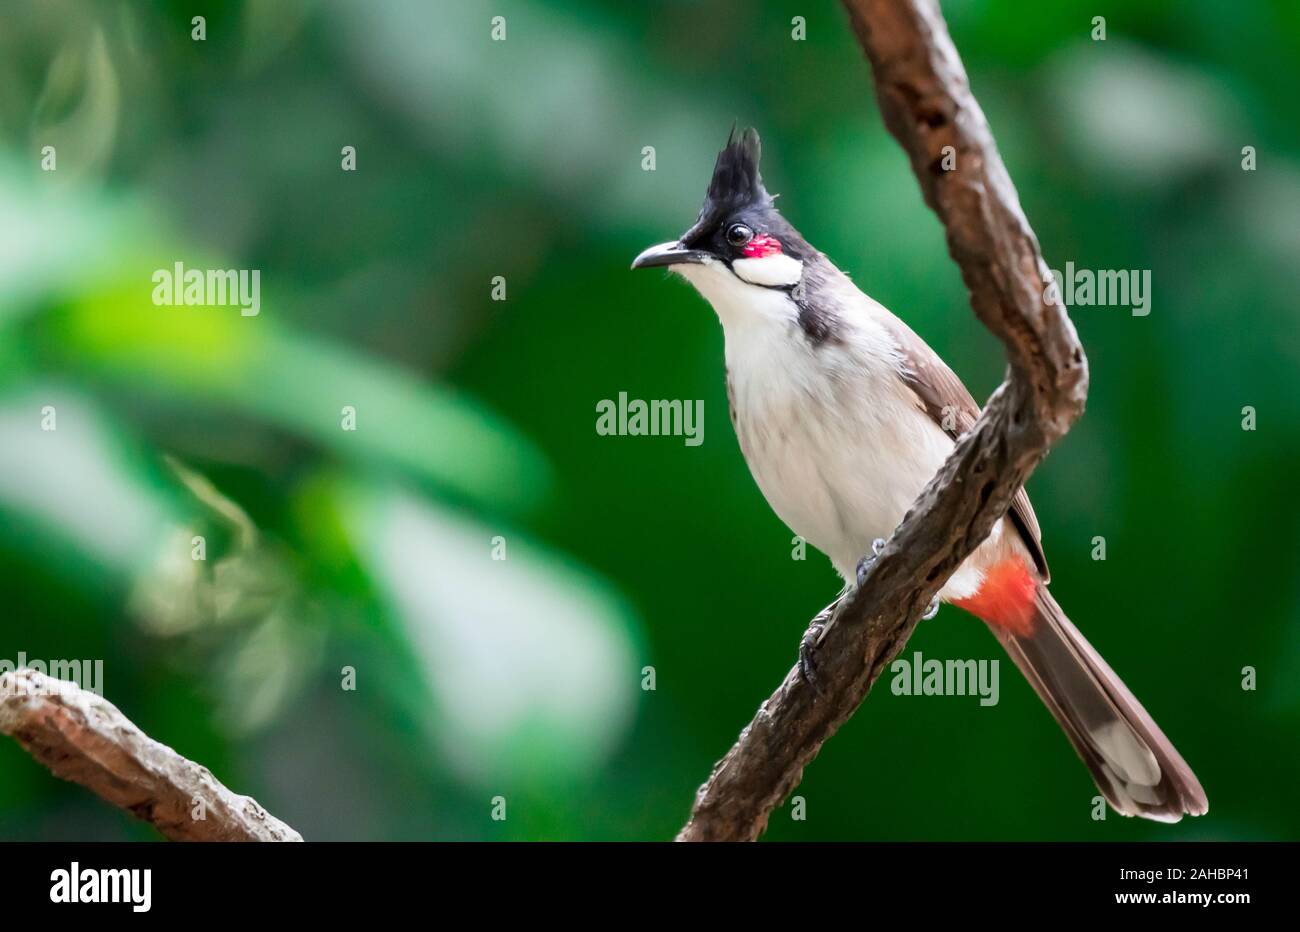 A Red-whiskered Bulbul bird is a passerine bird found in Asia ...